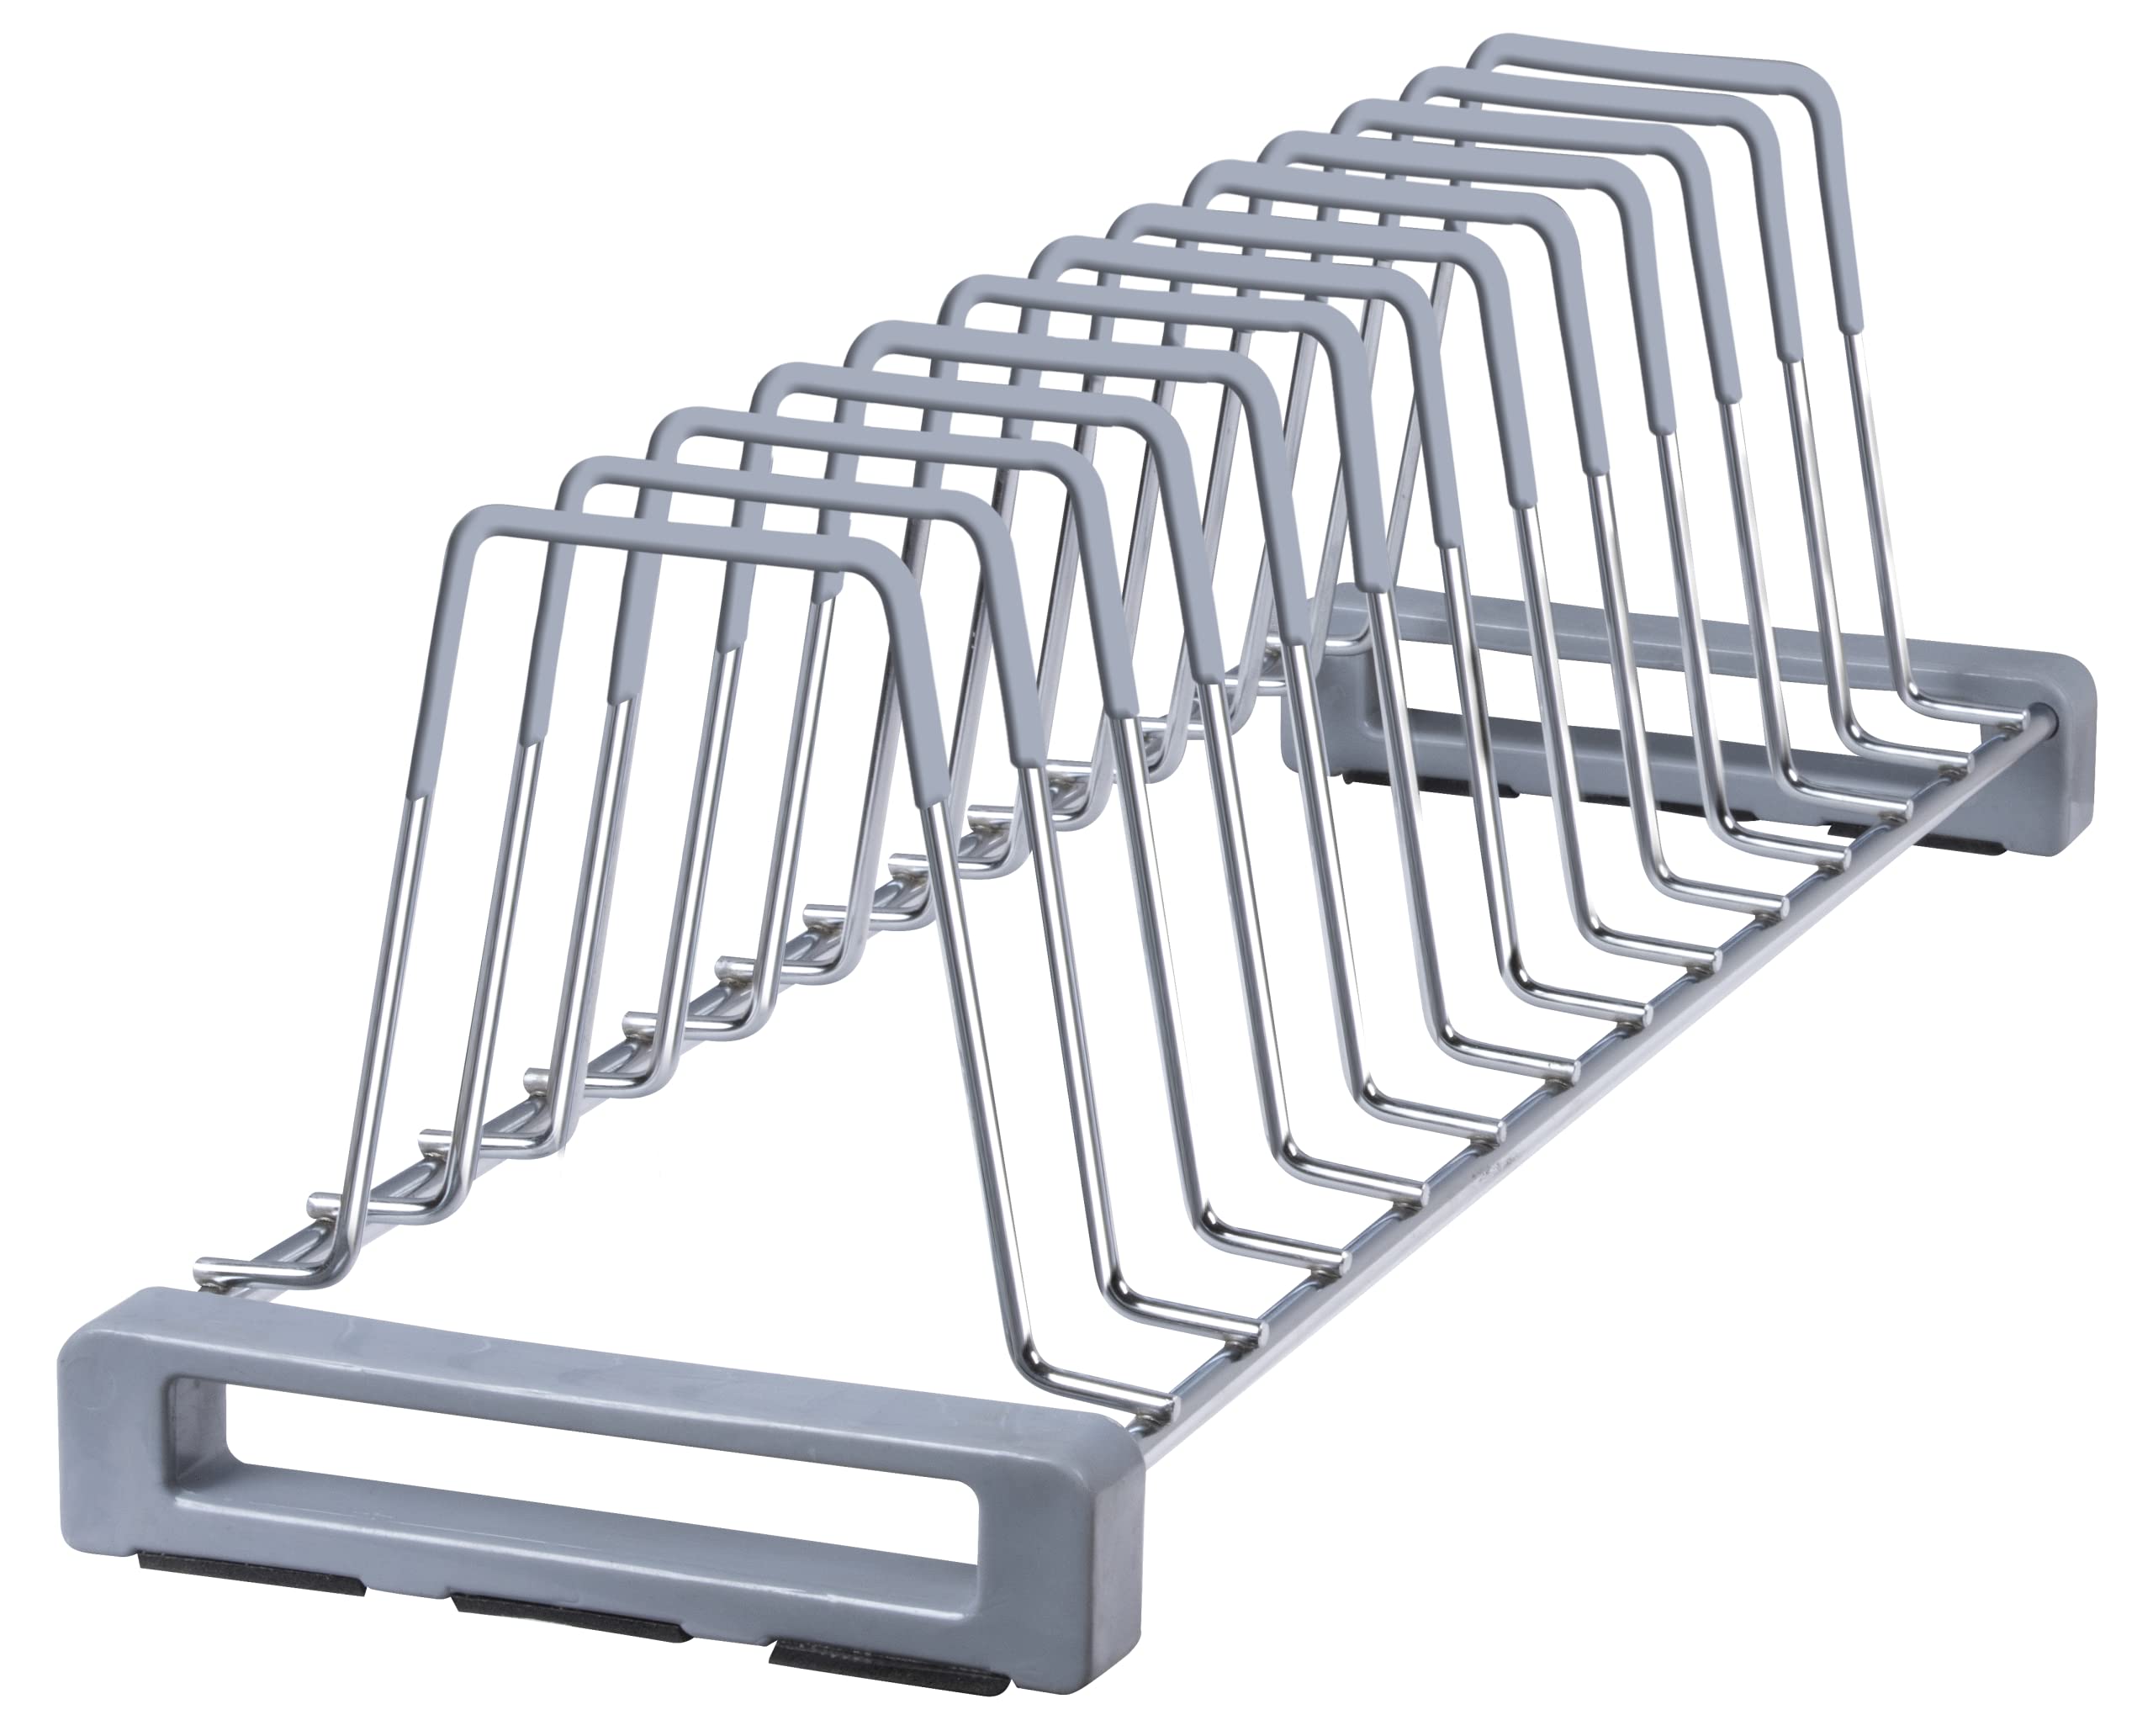 Plantex Stainless Steel Plate Stand/Dish Rack/Thali Stand for Modular Kitchen/Tandem Box Accessories (Chrome)